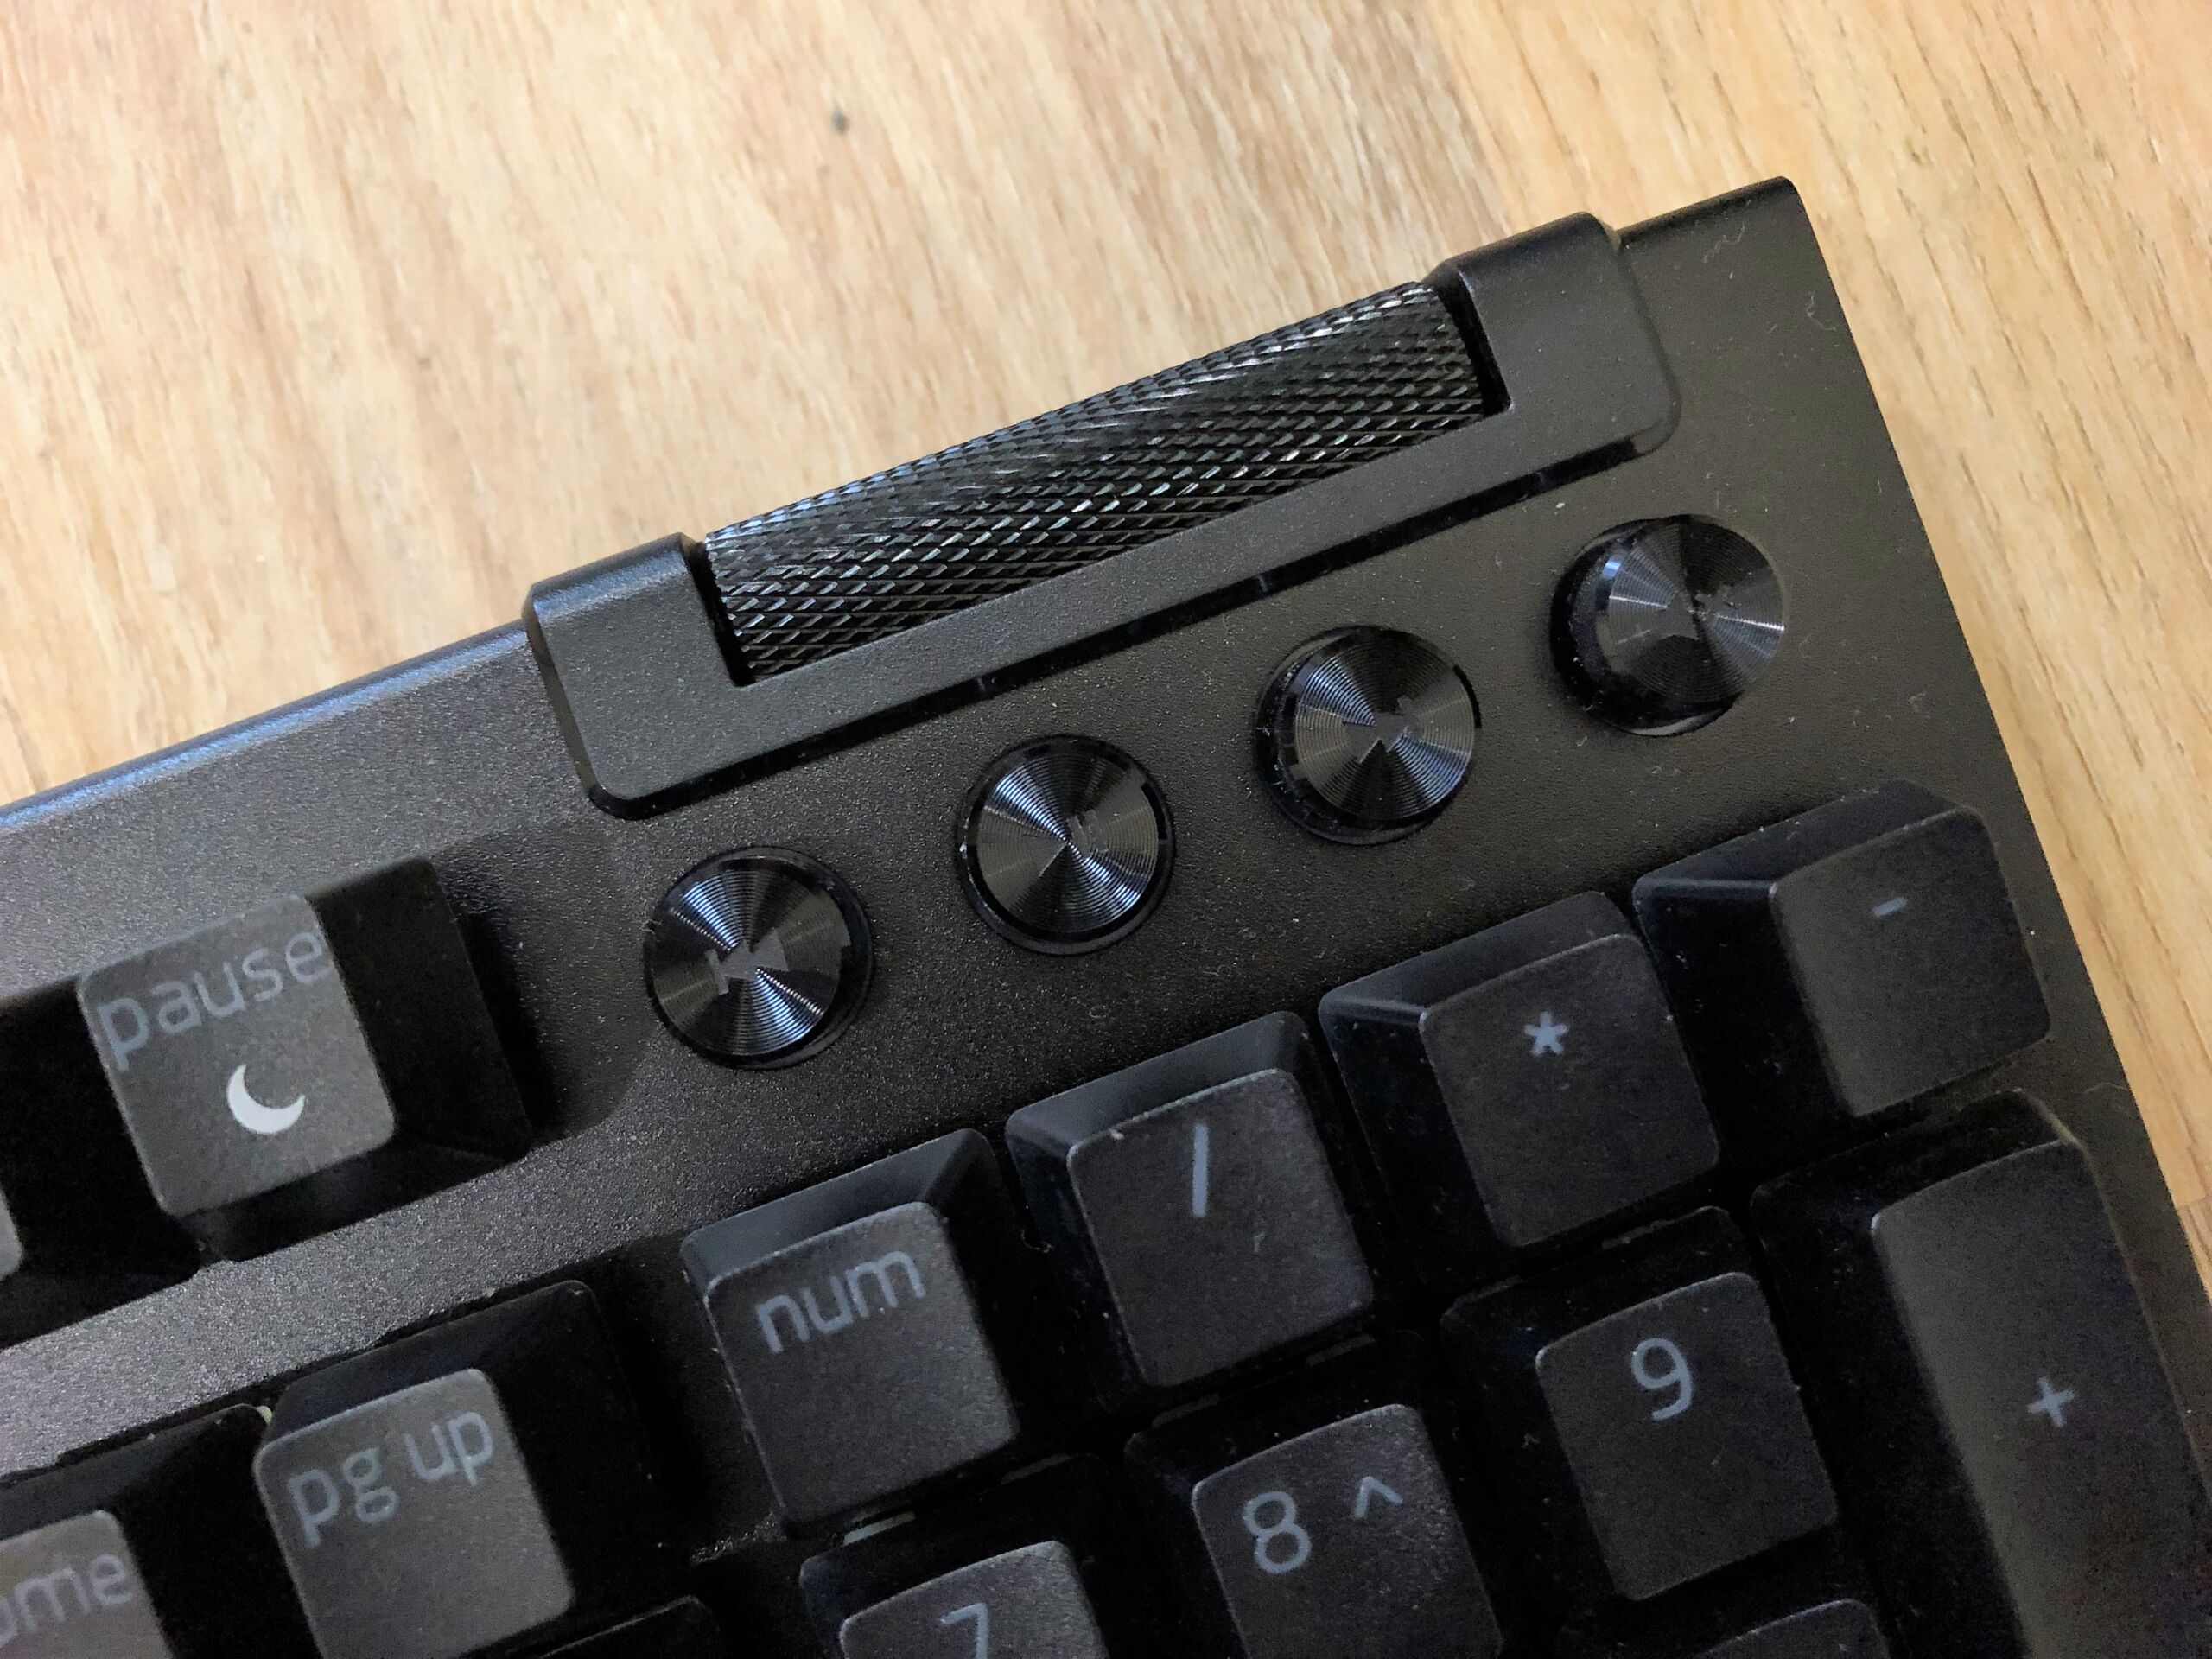 Razer BlackWidow V4 Pro review: More than enough buttons, too much